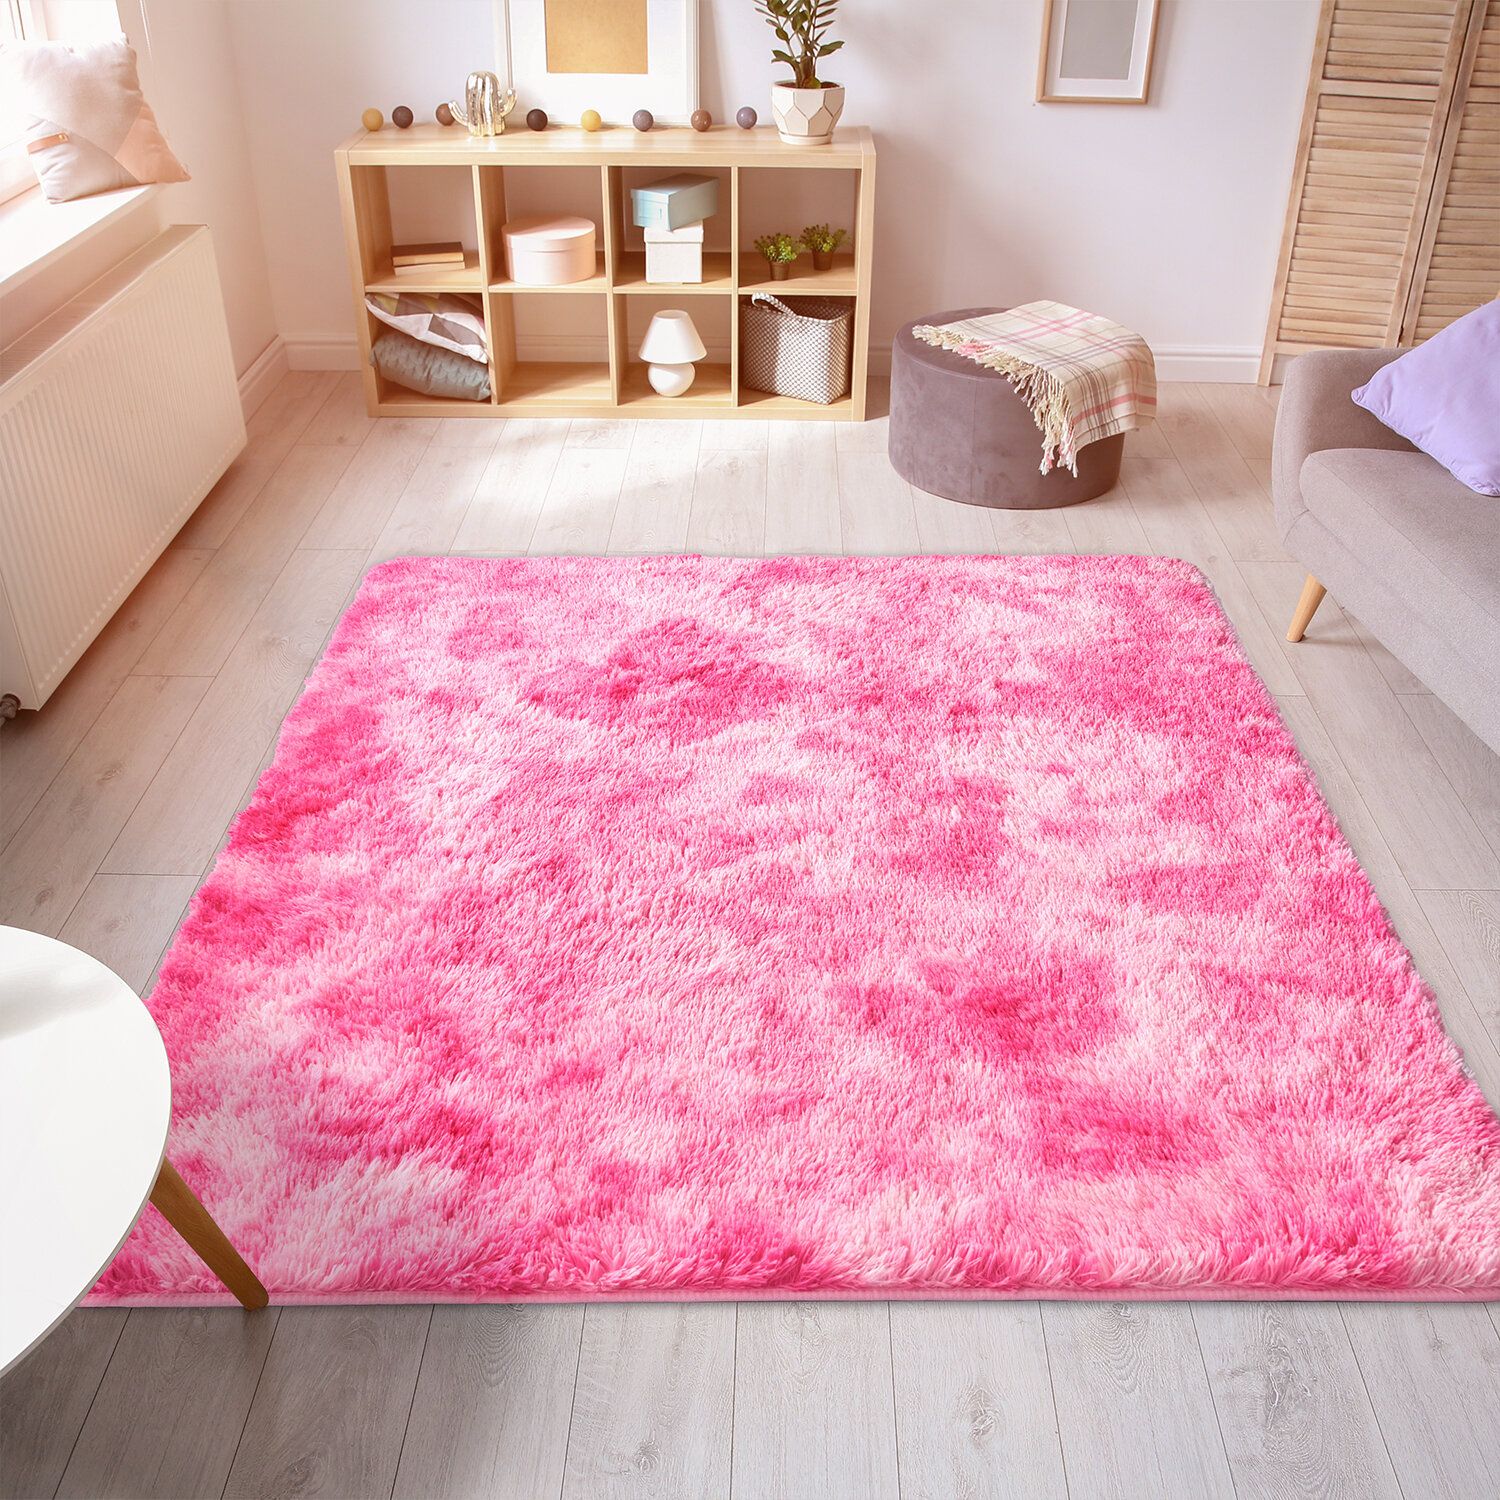 Mercer41 Belgard Machine Tufted Performance Pink Rug & Reviews | Wayfair In Pink Soft Touch Shag Rugs (Photo 4 of 15)